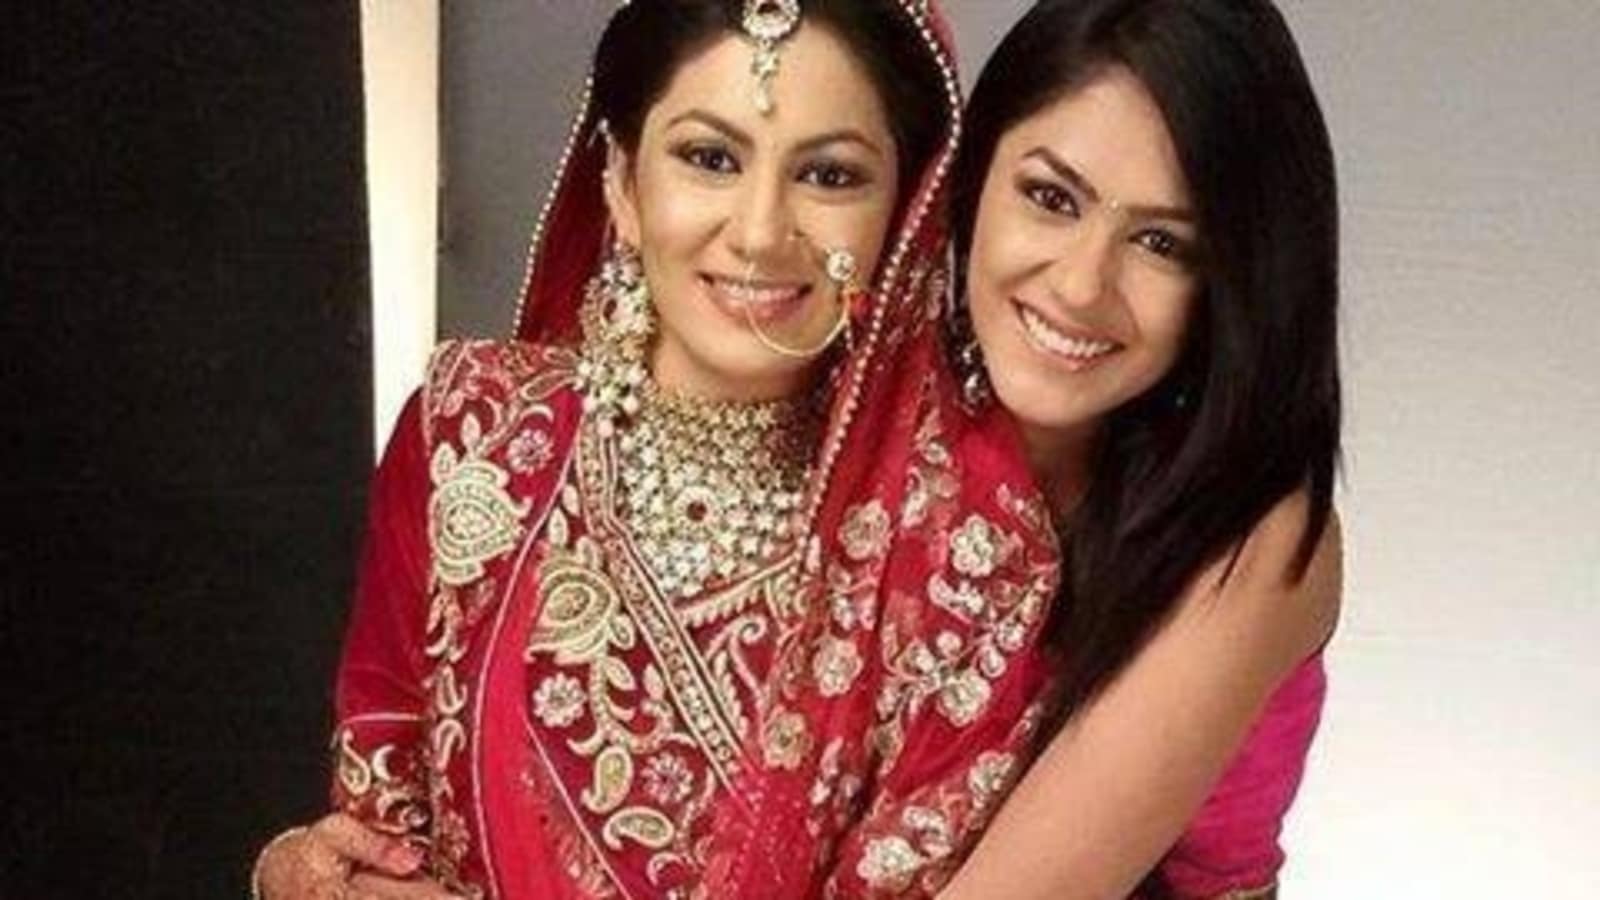 Mrunal Thakur on playing Sriti Jha’s sister in Kumkum Bhagya: ‘I was very adamant that I only wanted to play the lead’